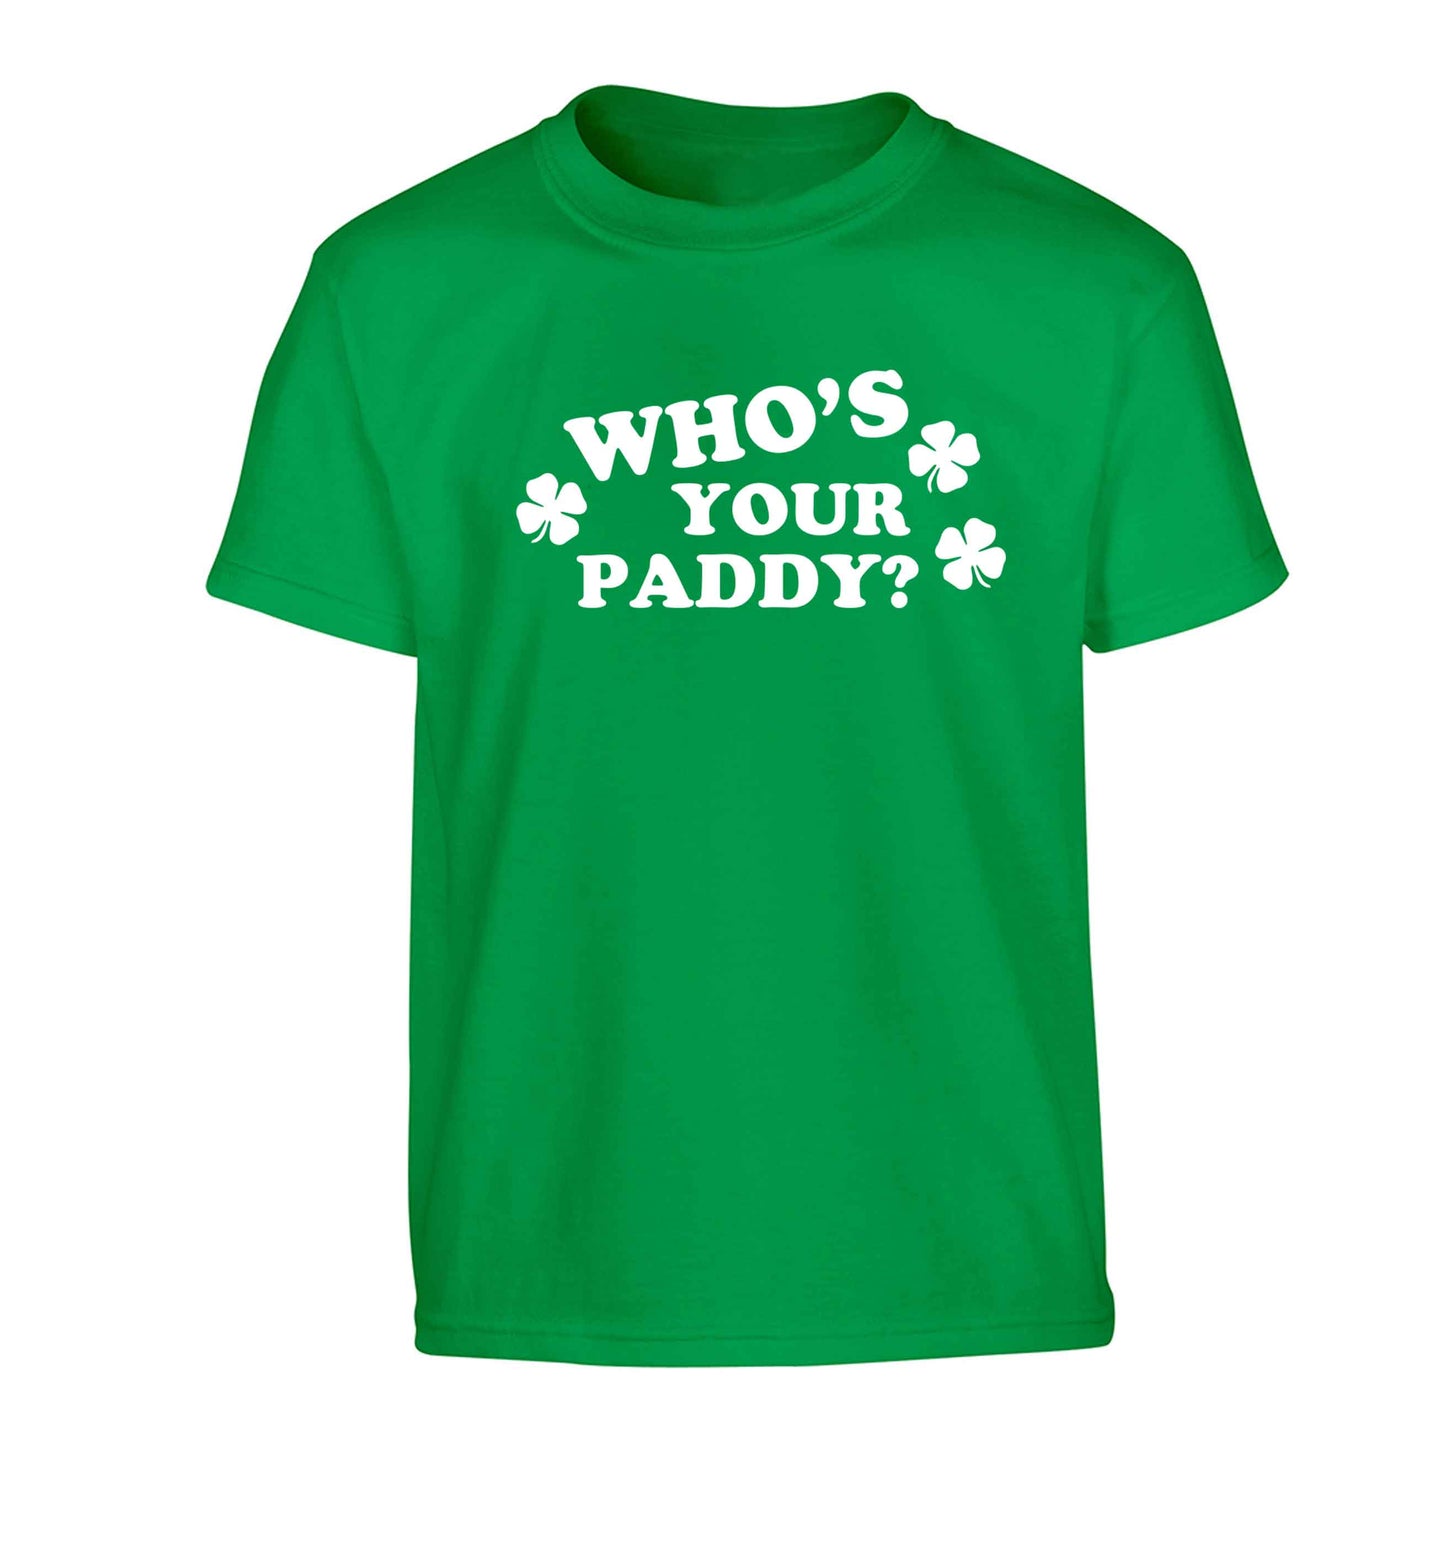 Who's your paddy? Children's green Tshirt 12-13 Years